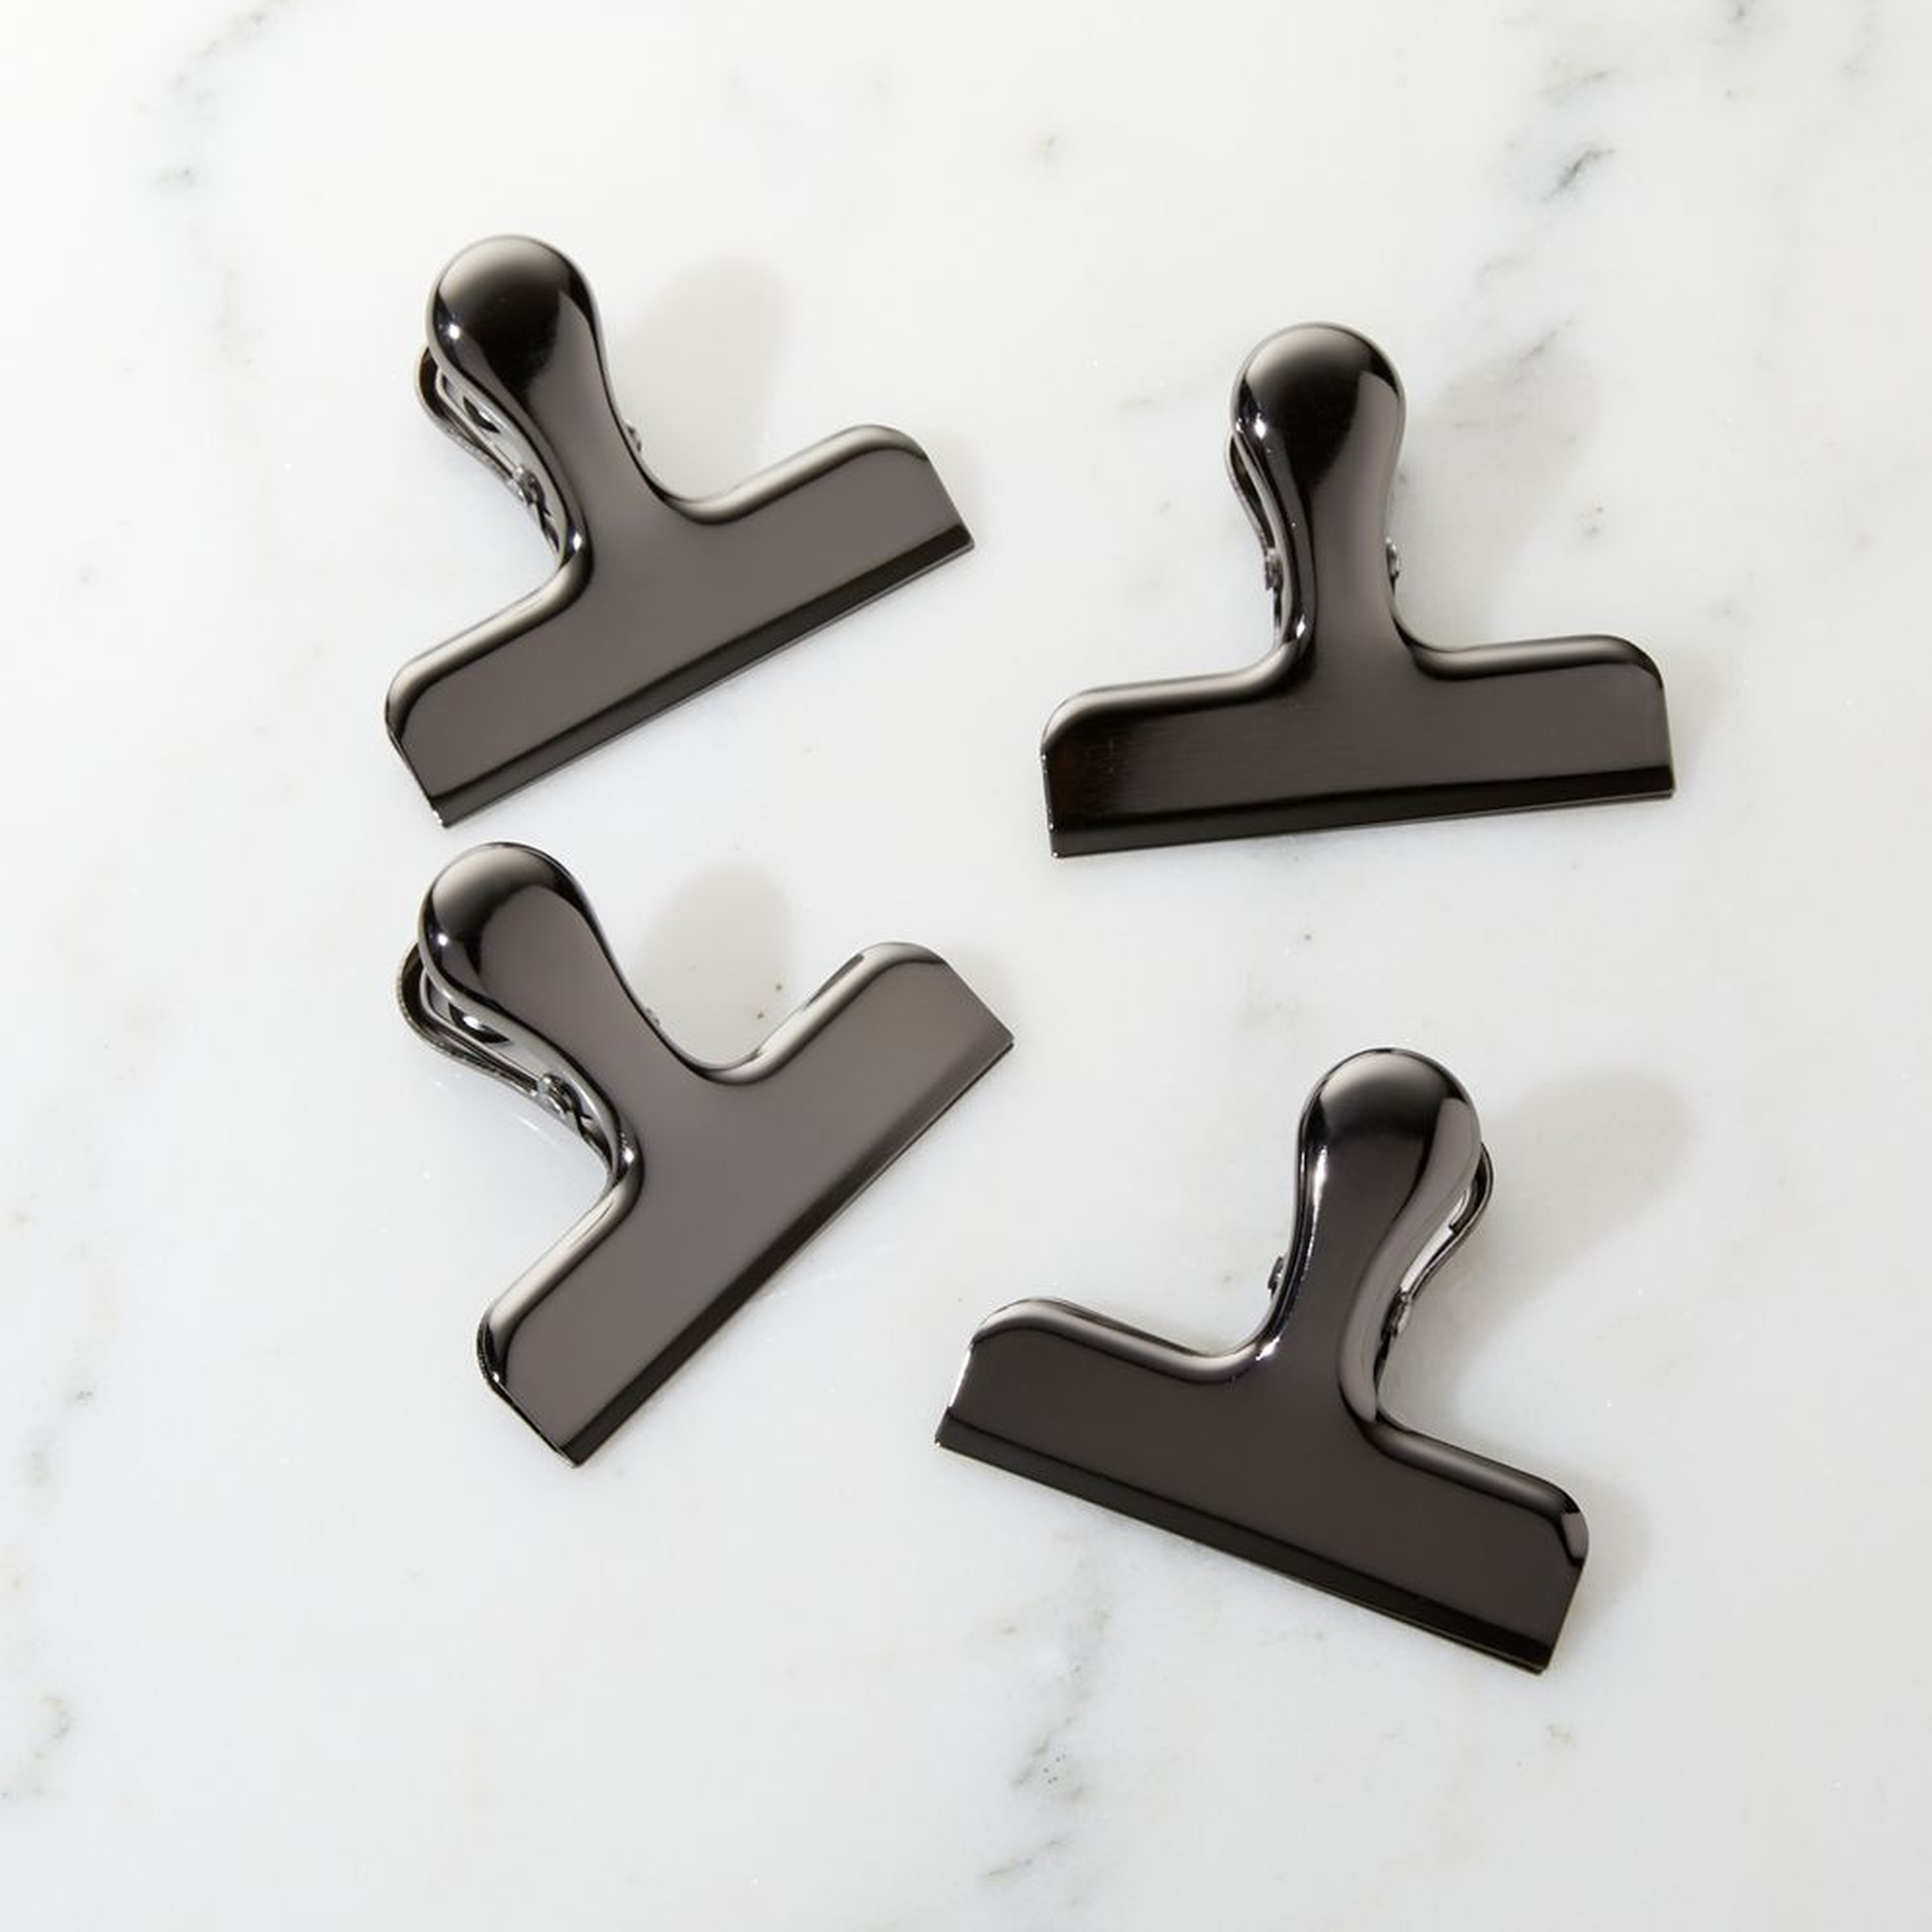 Metal Magnetic Chip Clips, Set of 4 - Crate and Barrel